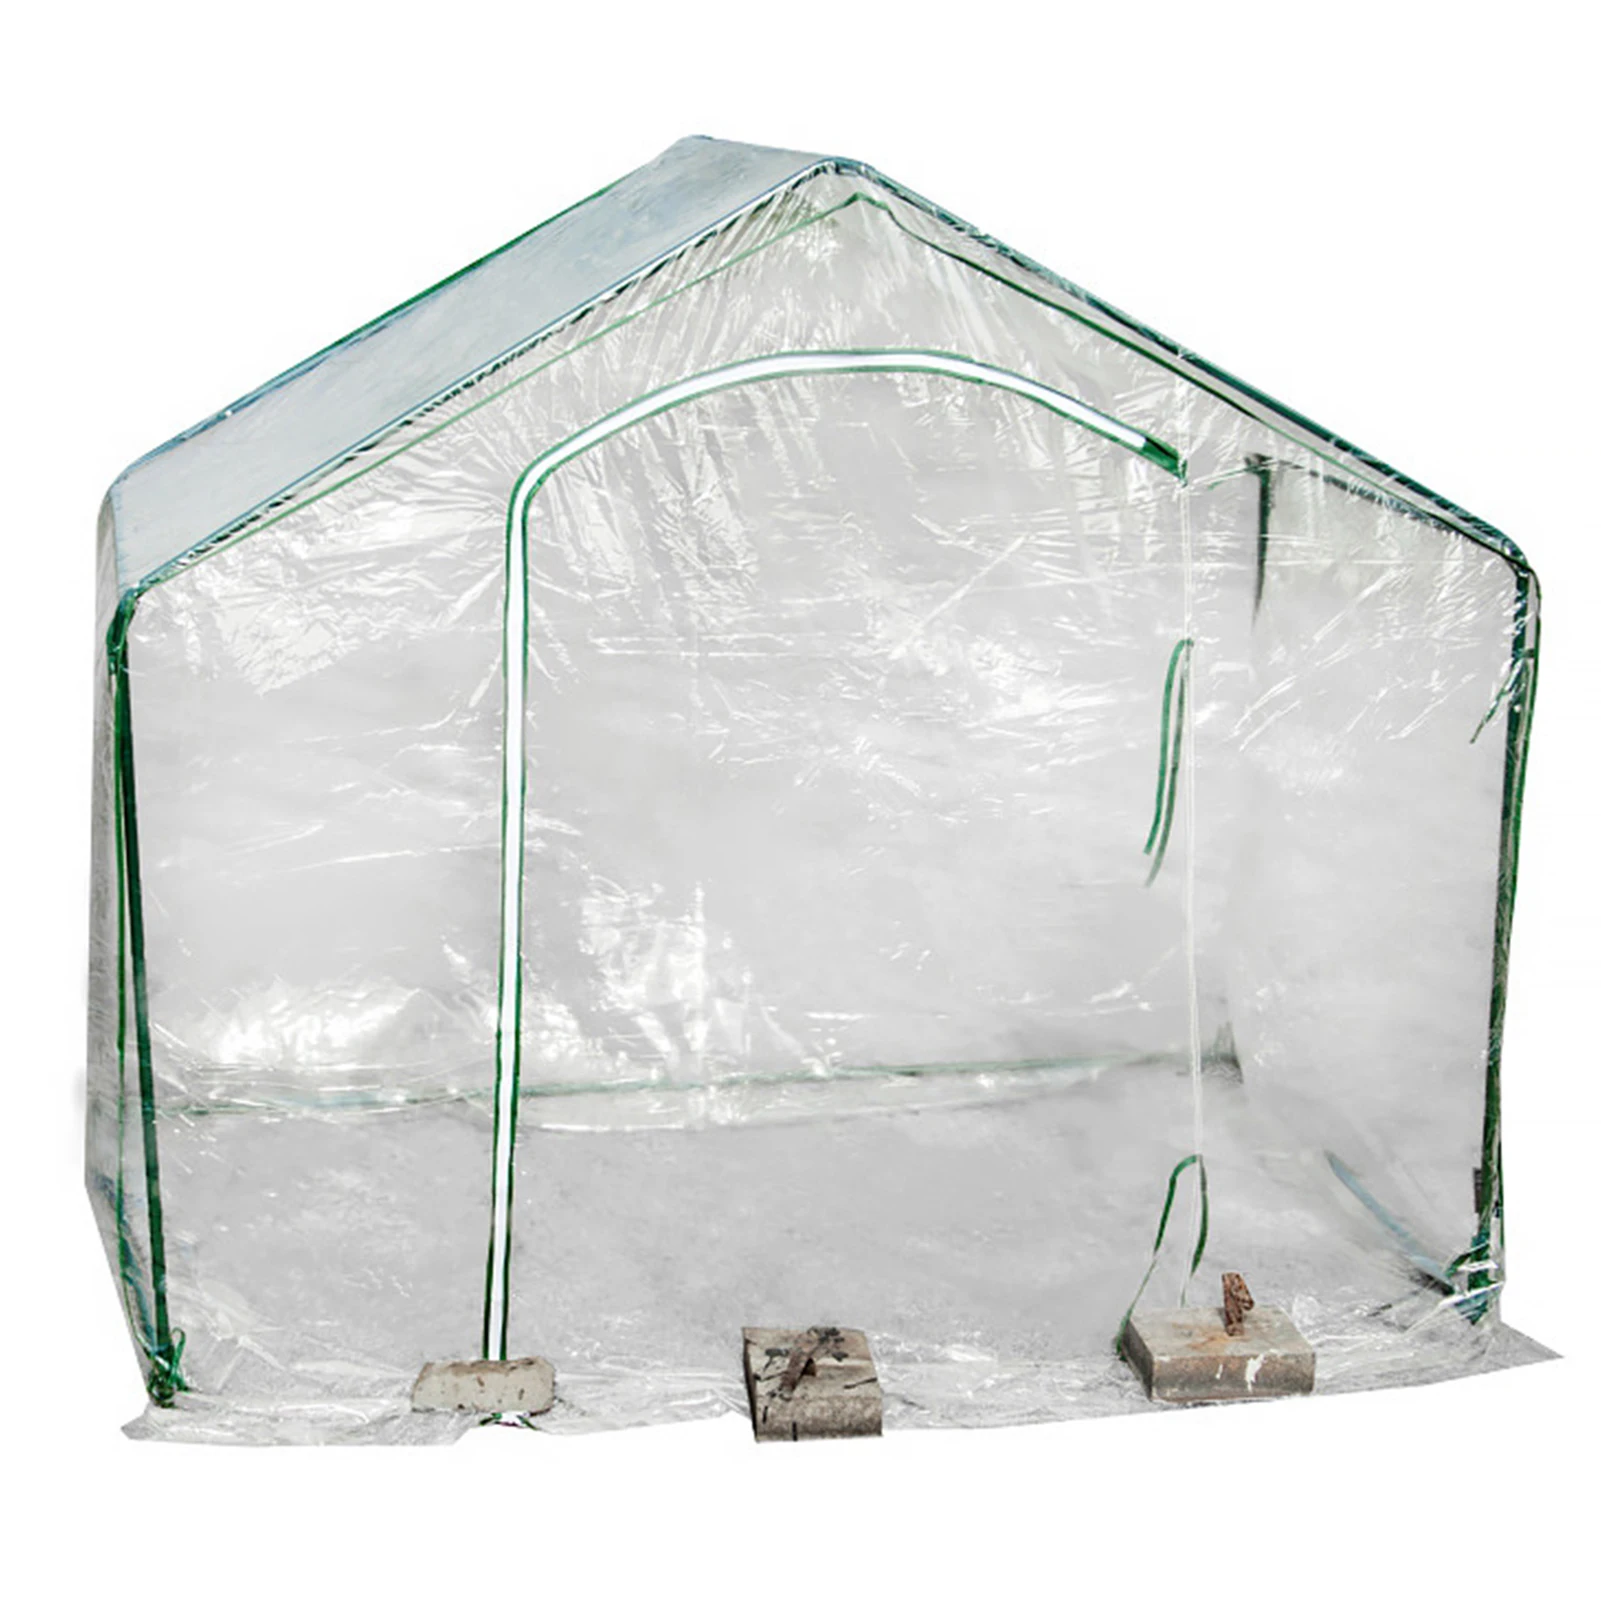 

Reinforced Mini Greenhouse Outdoor Rainproof Portable Grow House Antifreeze Hot House Shed Canopy For Plants Flowers Herbs